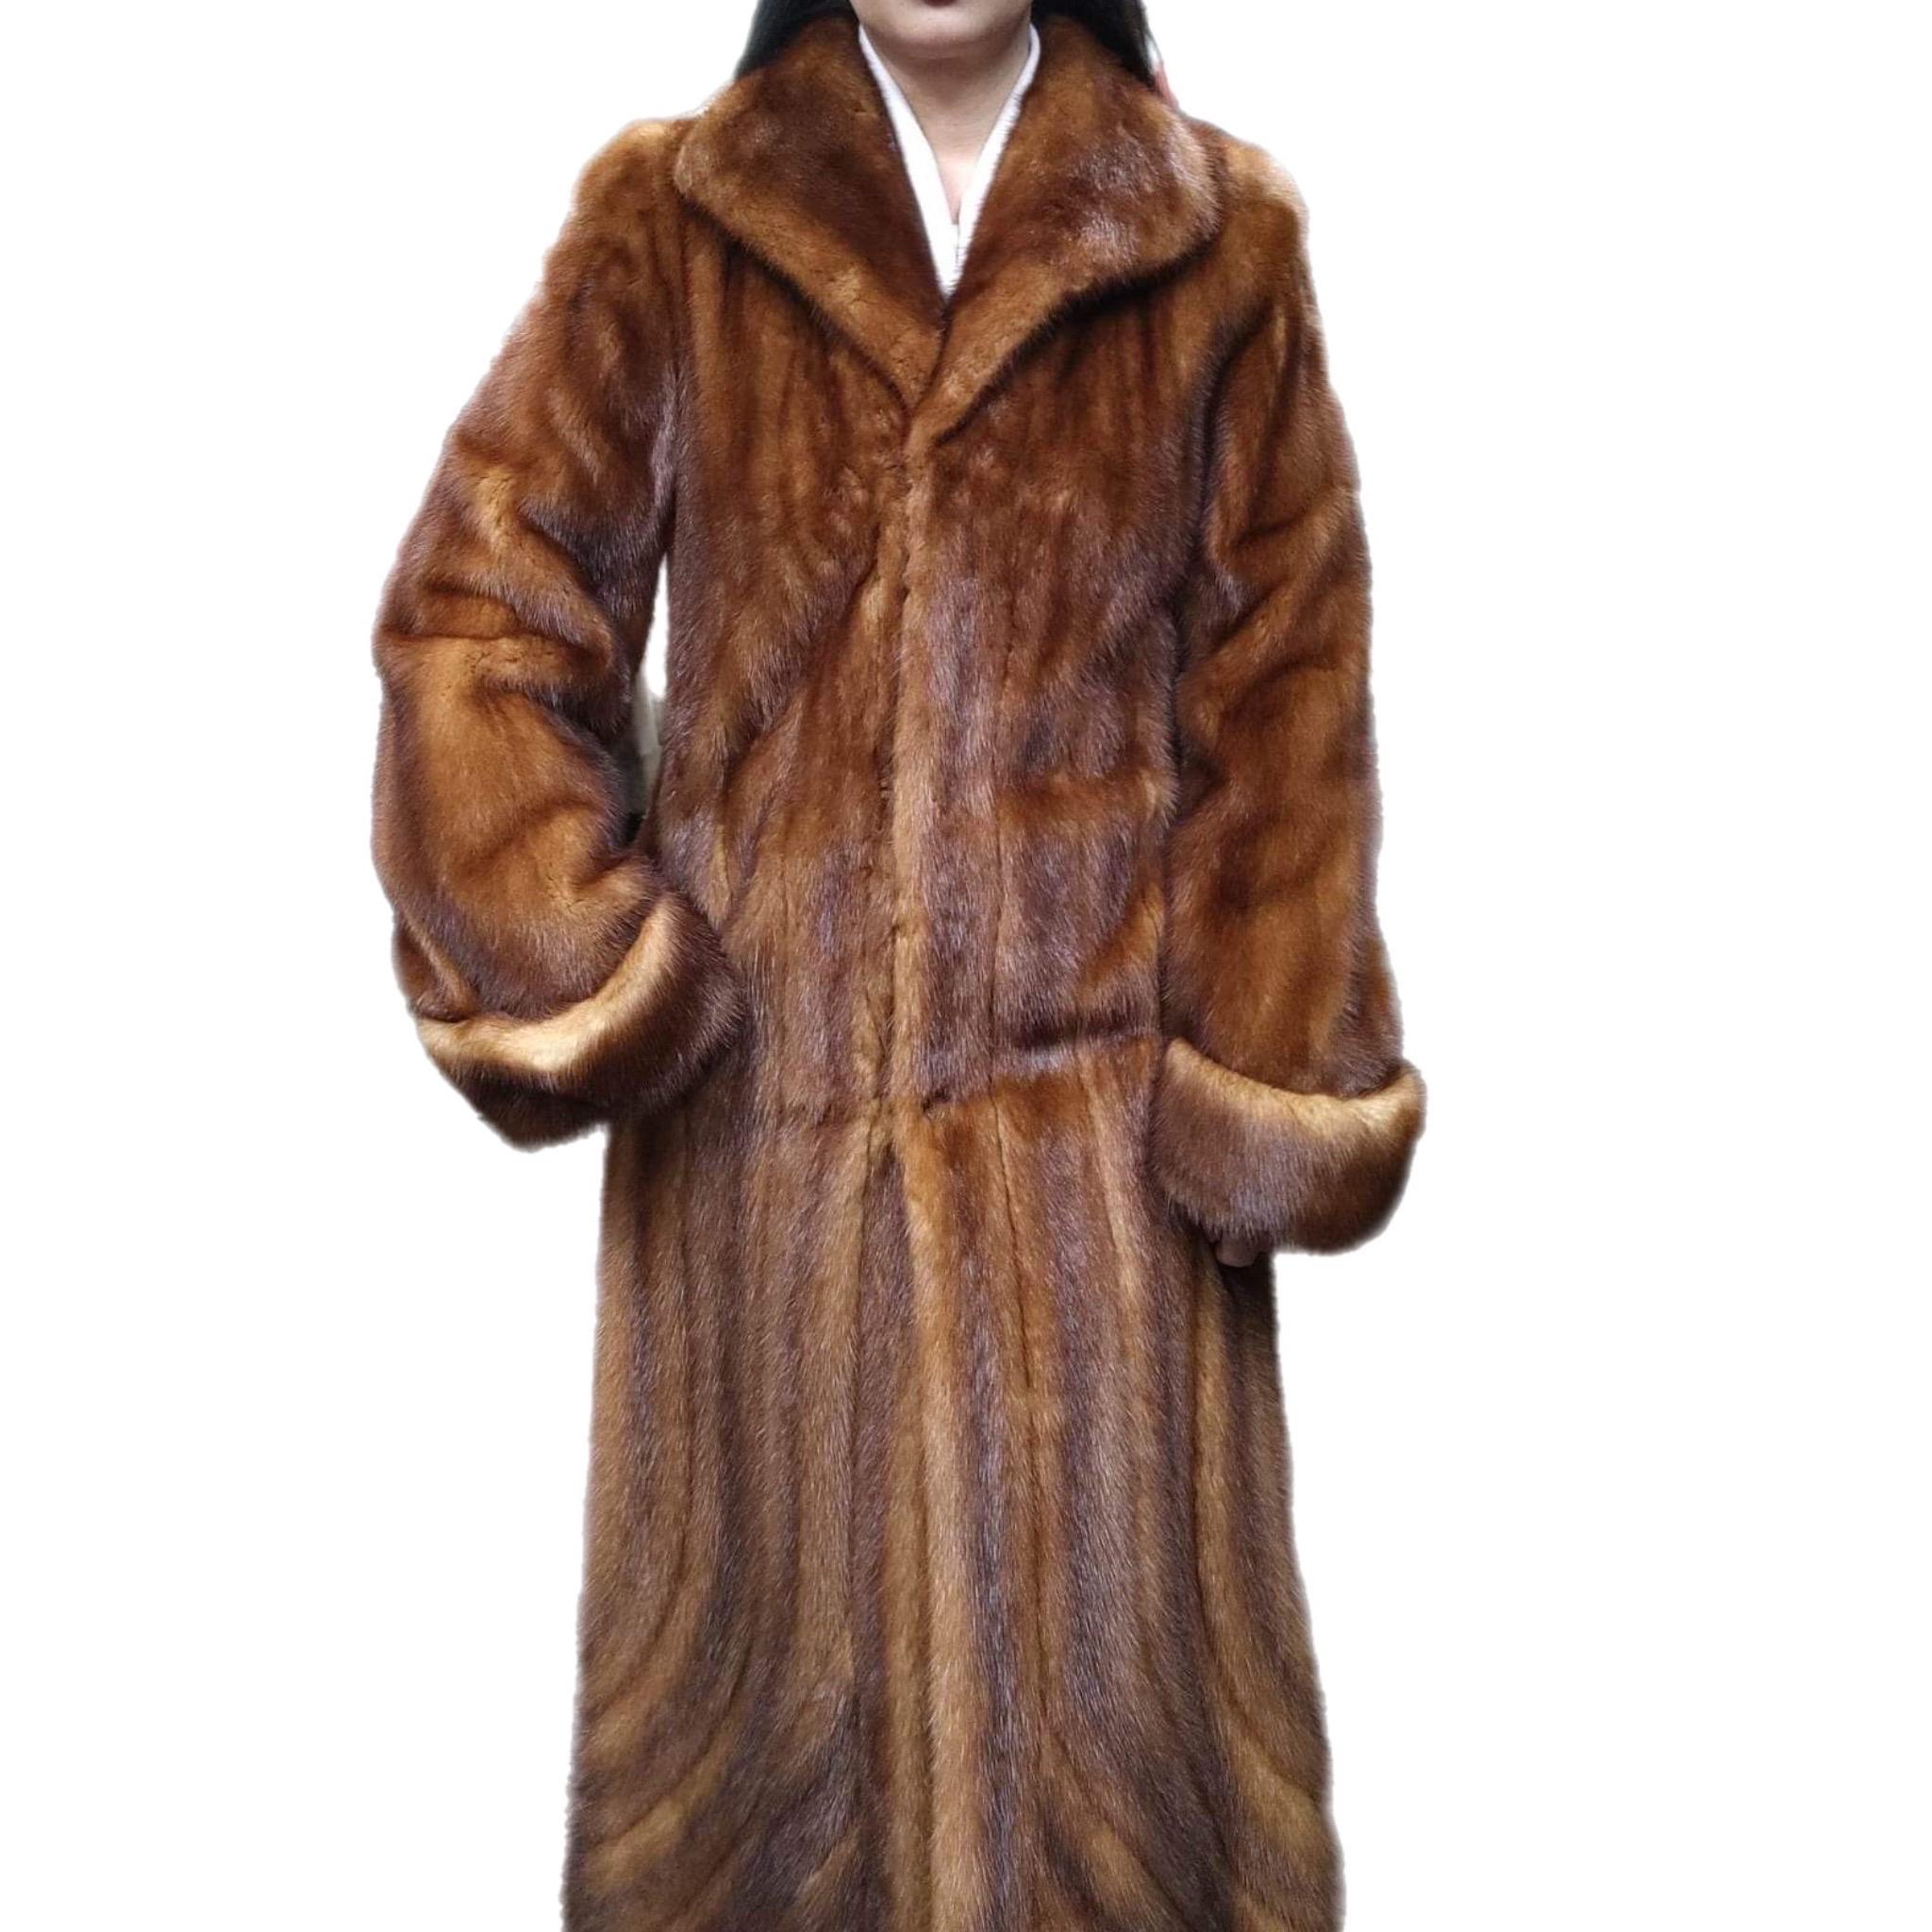 BRAND NEW WHISKEY MINK FUR COAT WOMENS S 6
Never used new soft mink fur jacket.
Made by exclusive line of furriers
MEASUREMENTS:

Size 6 (S)
Length: 45”
Shoulder: 20”
Sleeves: 31”-28”
